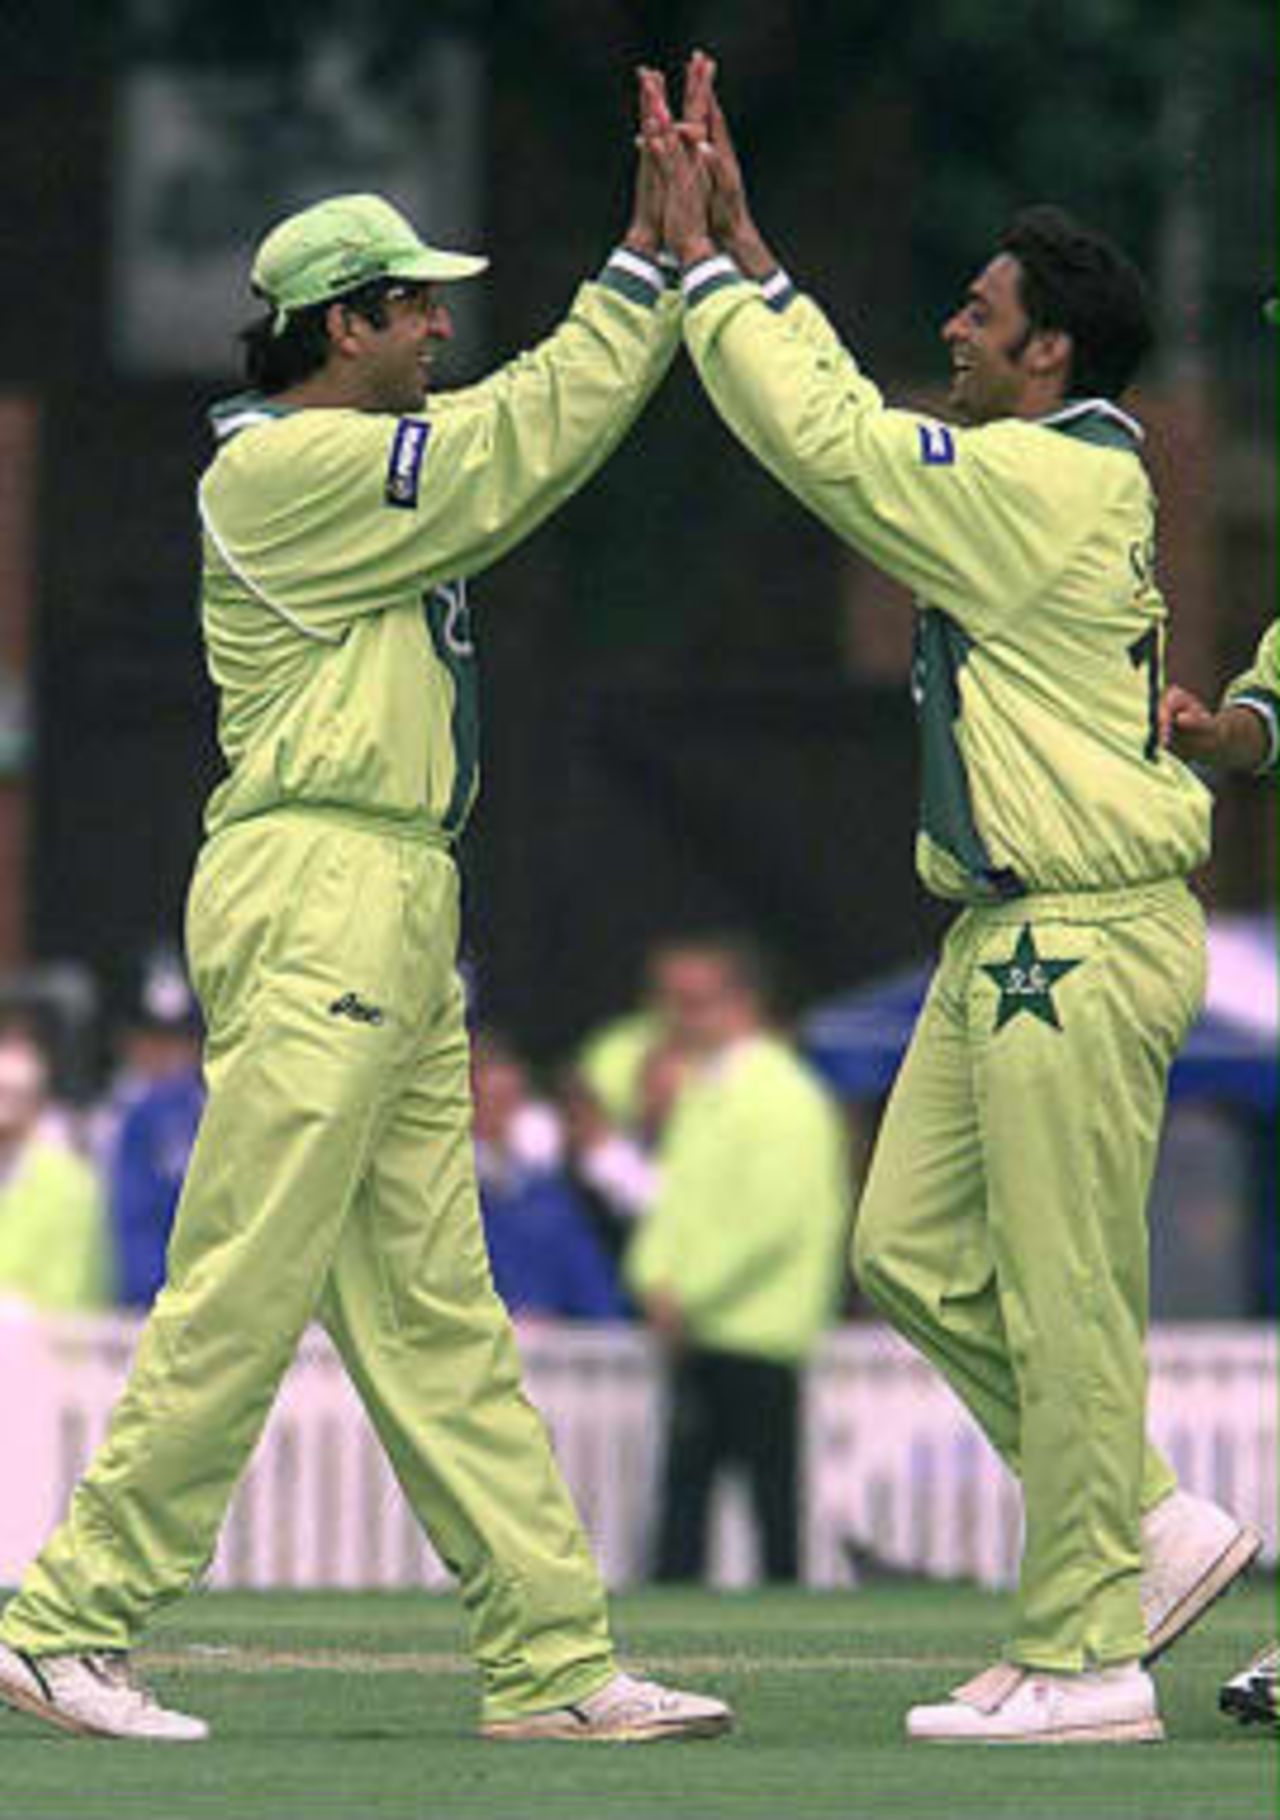 Pakistan captain Wasim Akram, (L) celebrates with teammate Shoaib Akhtar following the dismissal of Zimbabwe captain, Alistair Campbell for three runs caught by Wasim, and bowled by Abdul Razzaq during today's 11th June 1999 Cricket World Cup Super Six match at The Oval, London